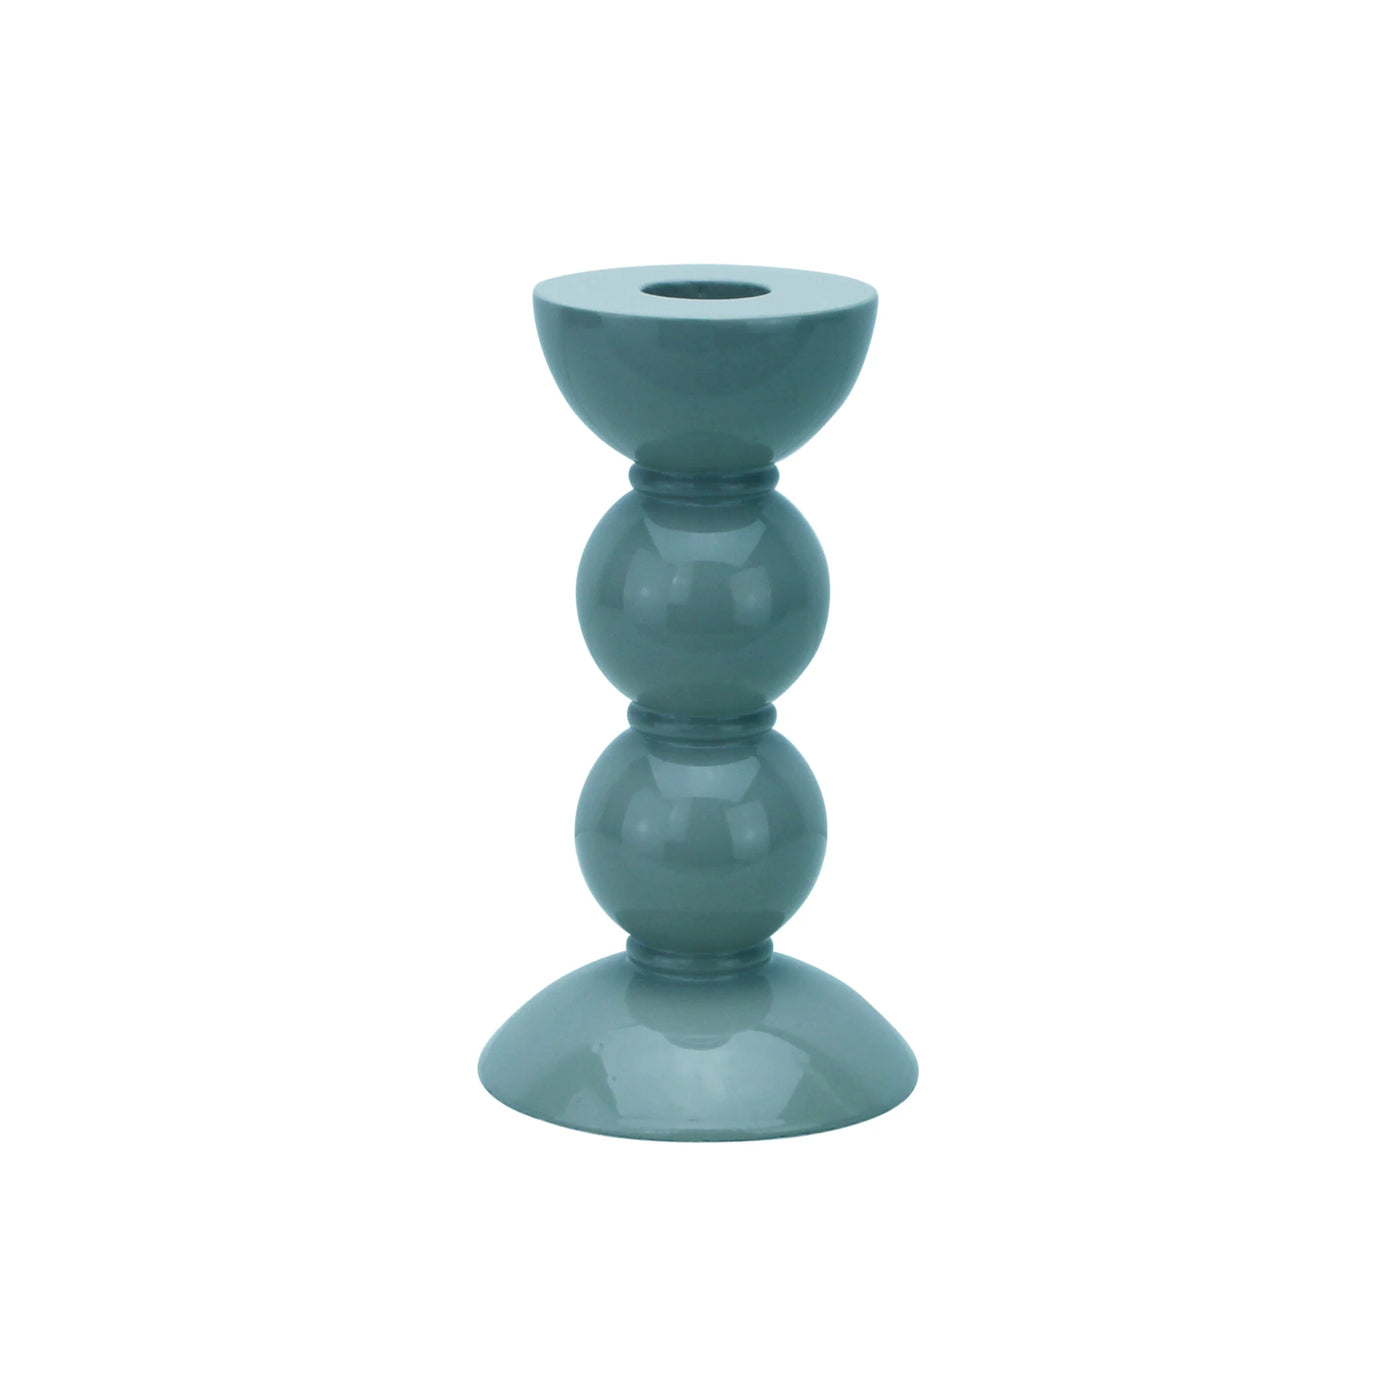 Addison Ross Bobbin Candlestick-Home/Giftware-Chambray Blue-14CM-Kevin's Fine Outdoor Gear & Apparel